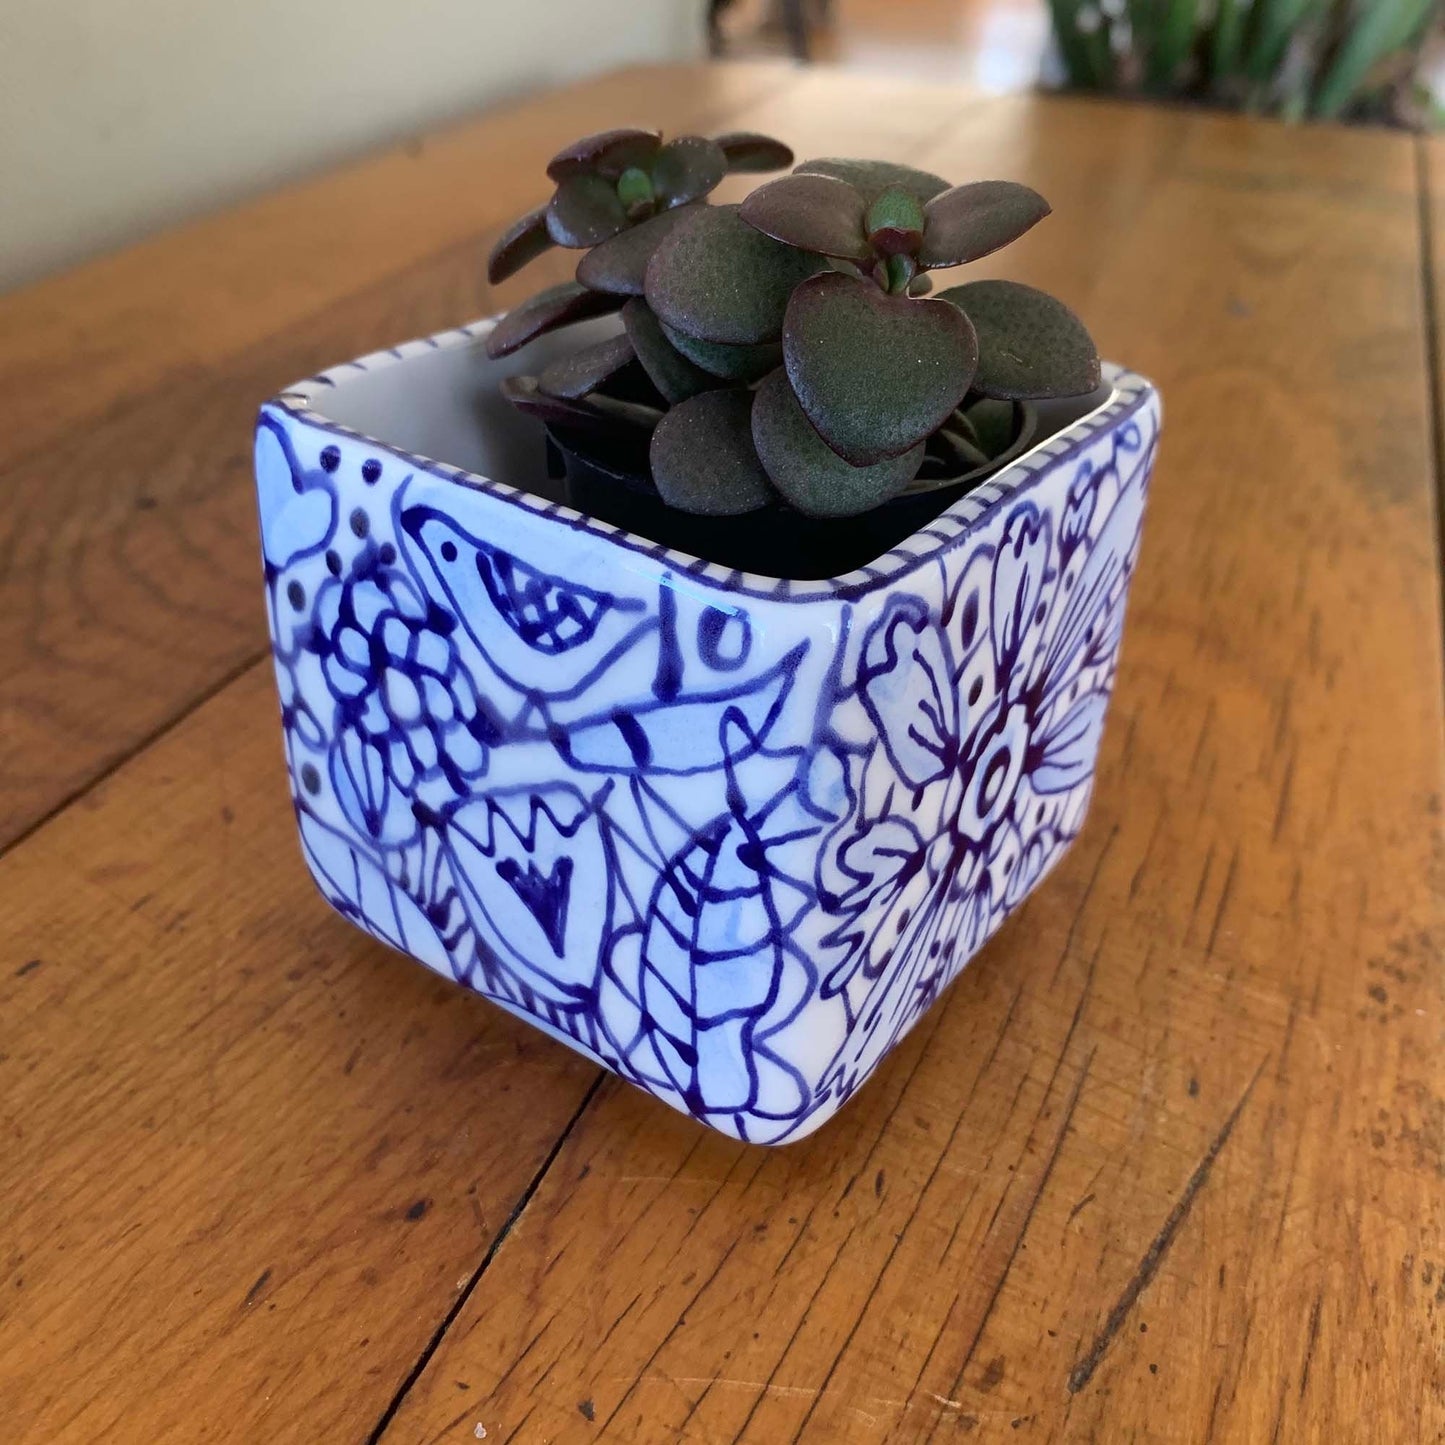 Square Planter, small 3" Additional colors available. Design may vary as each piece is one of a kind.